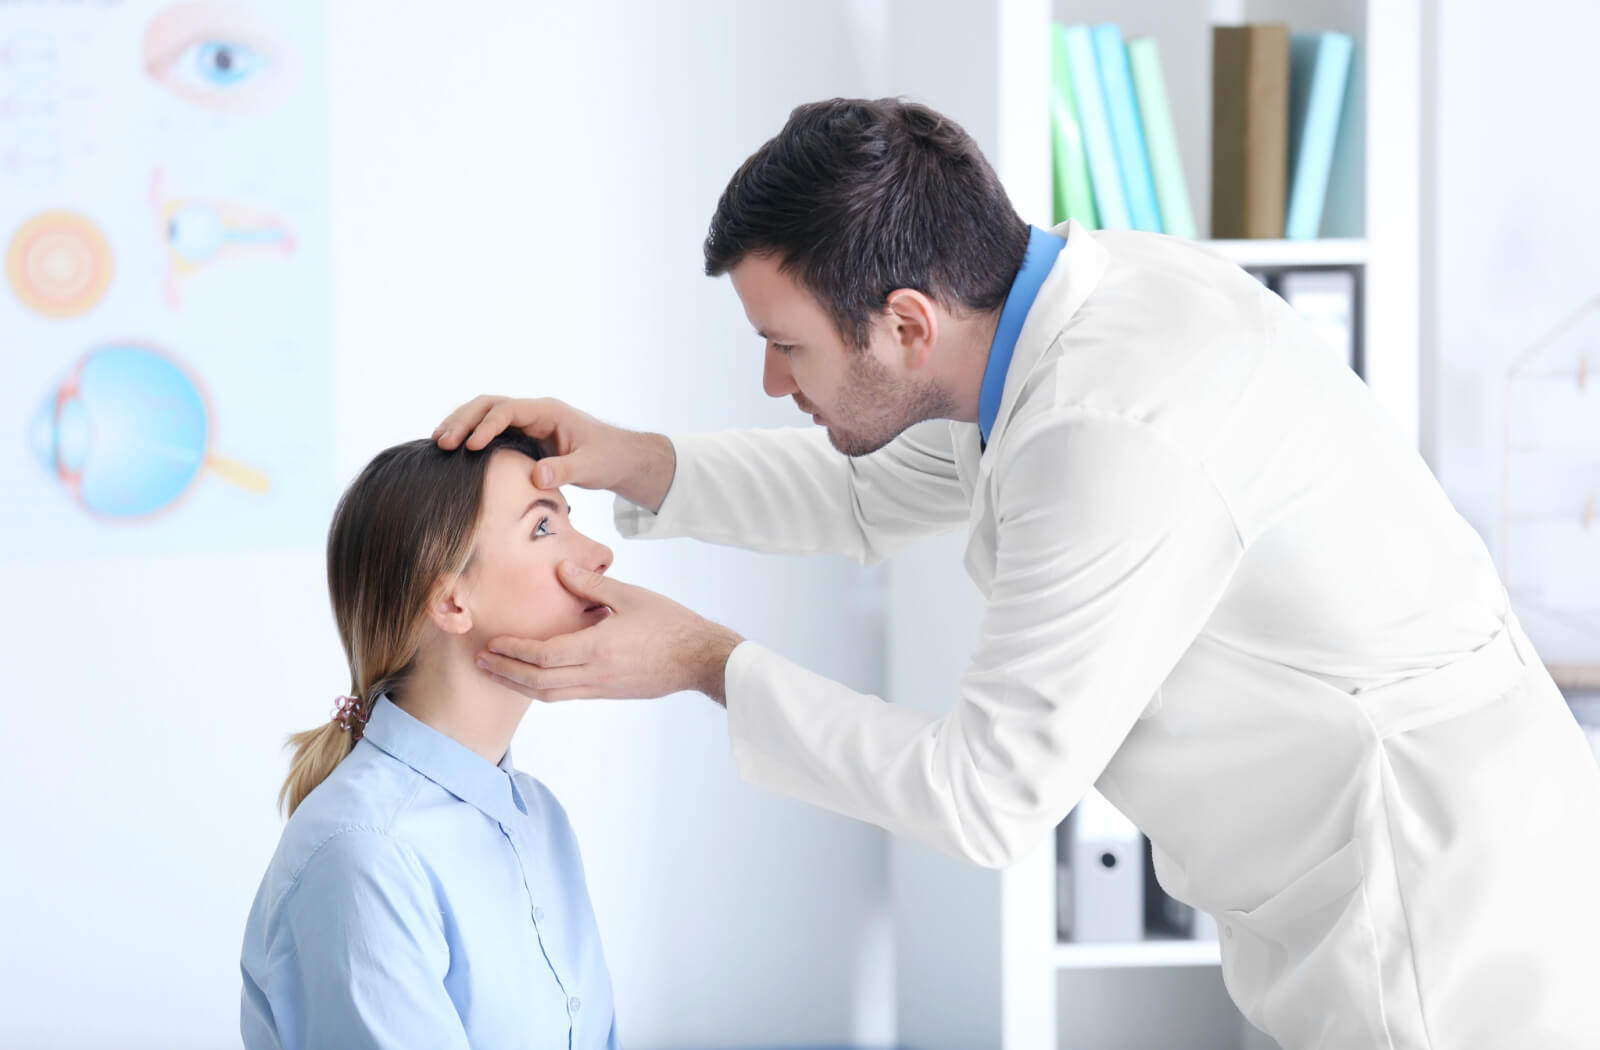 A male eye doctor is examining the eye of a female patient in a light blue collared long-sleeve for her regular eye check-up. The doctor is looking closely at the eye of the patient.